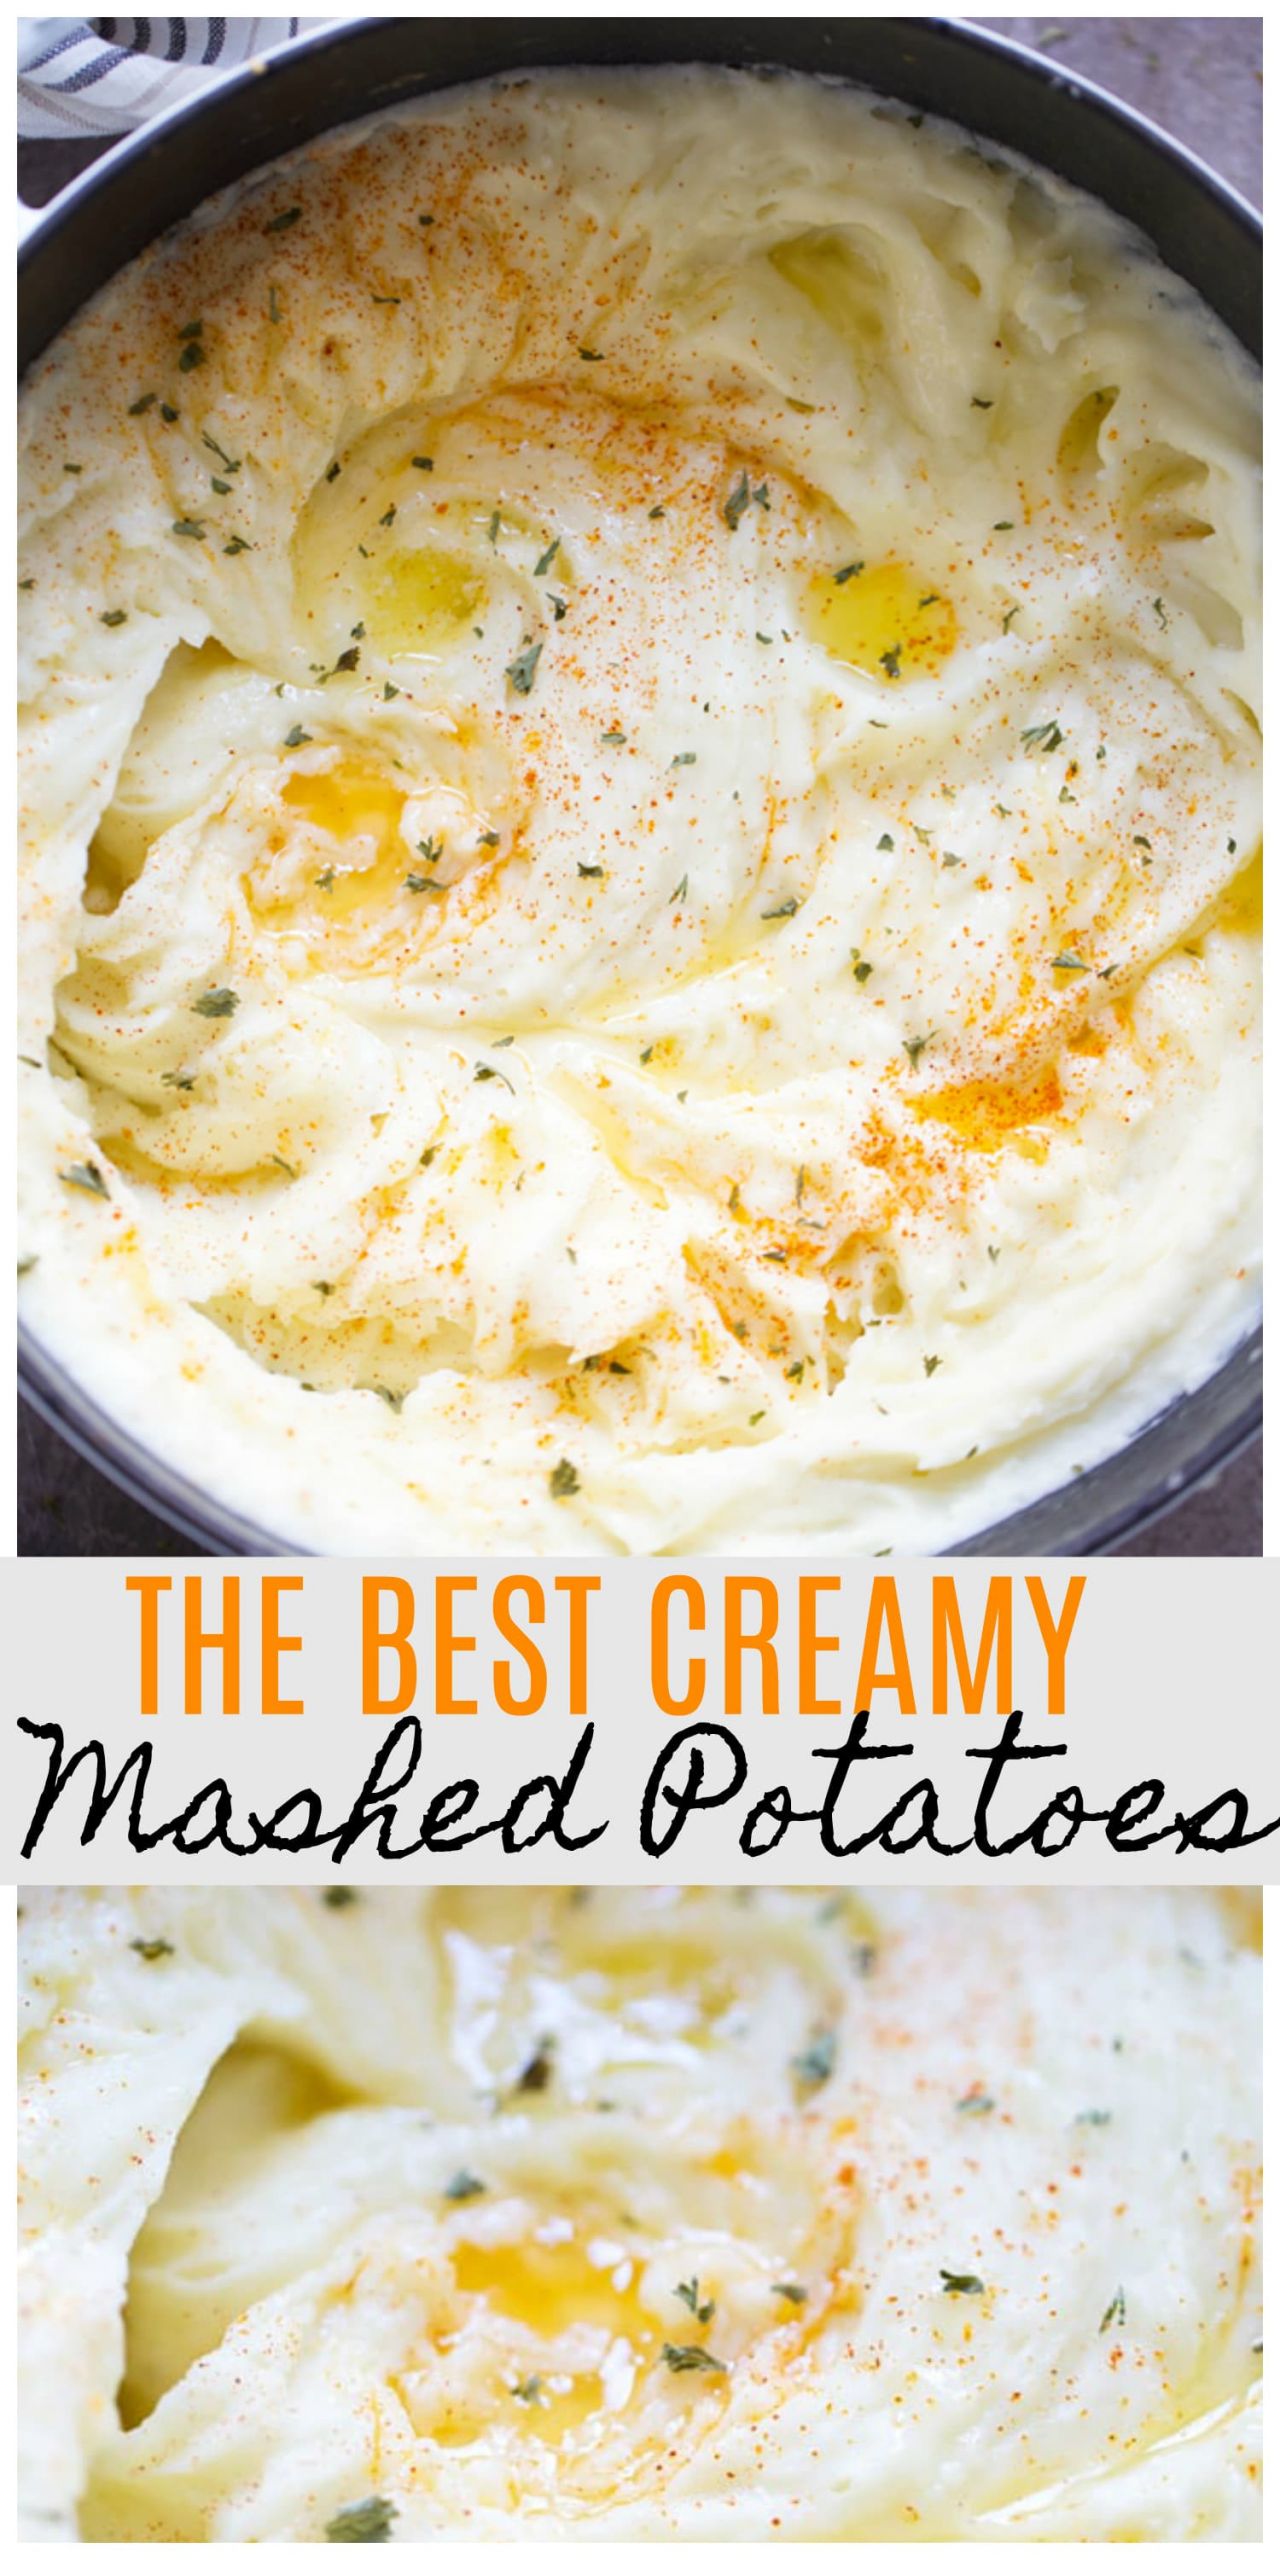 The Best Mashed Potatoes
 How to Make the Creamiest Dreamiest Mashed Potatoes